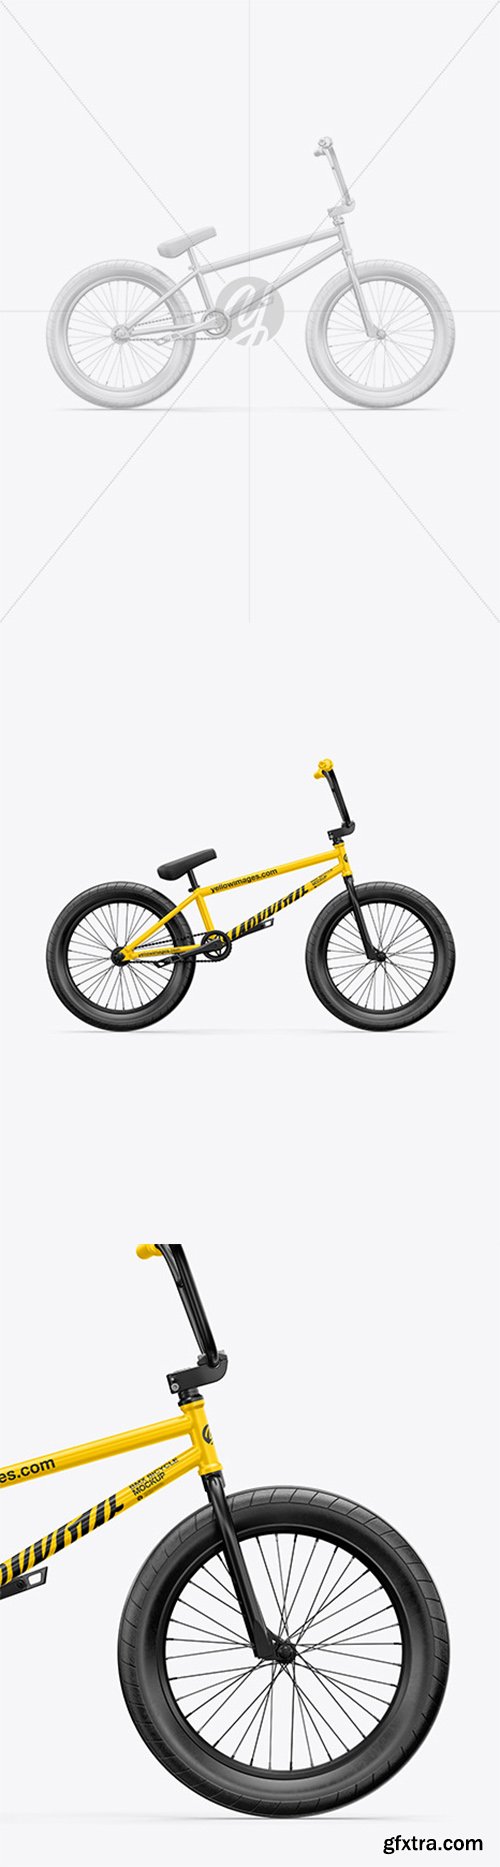 BMX Bicycle Mockup - Right Side View 64708